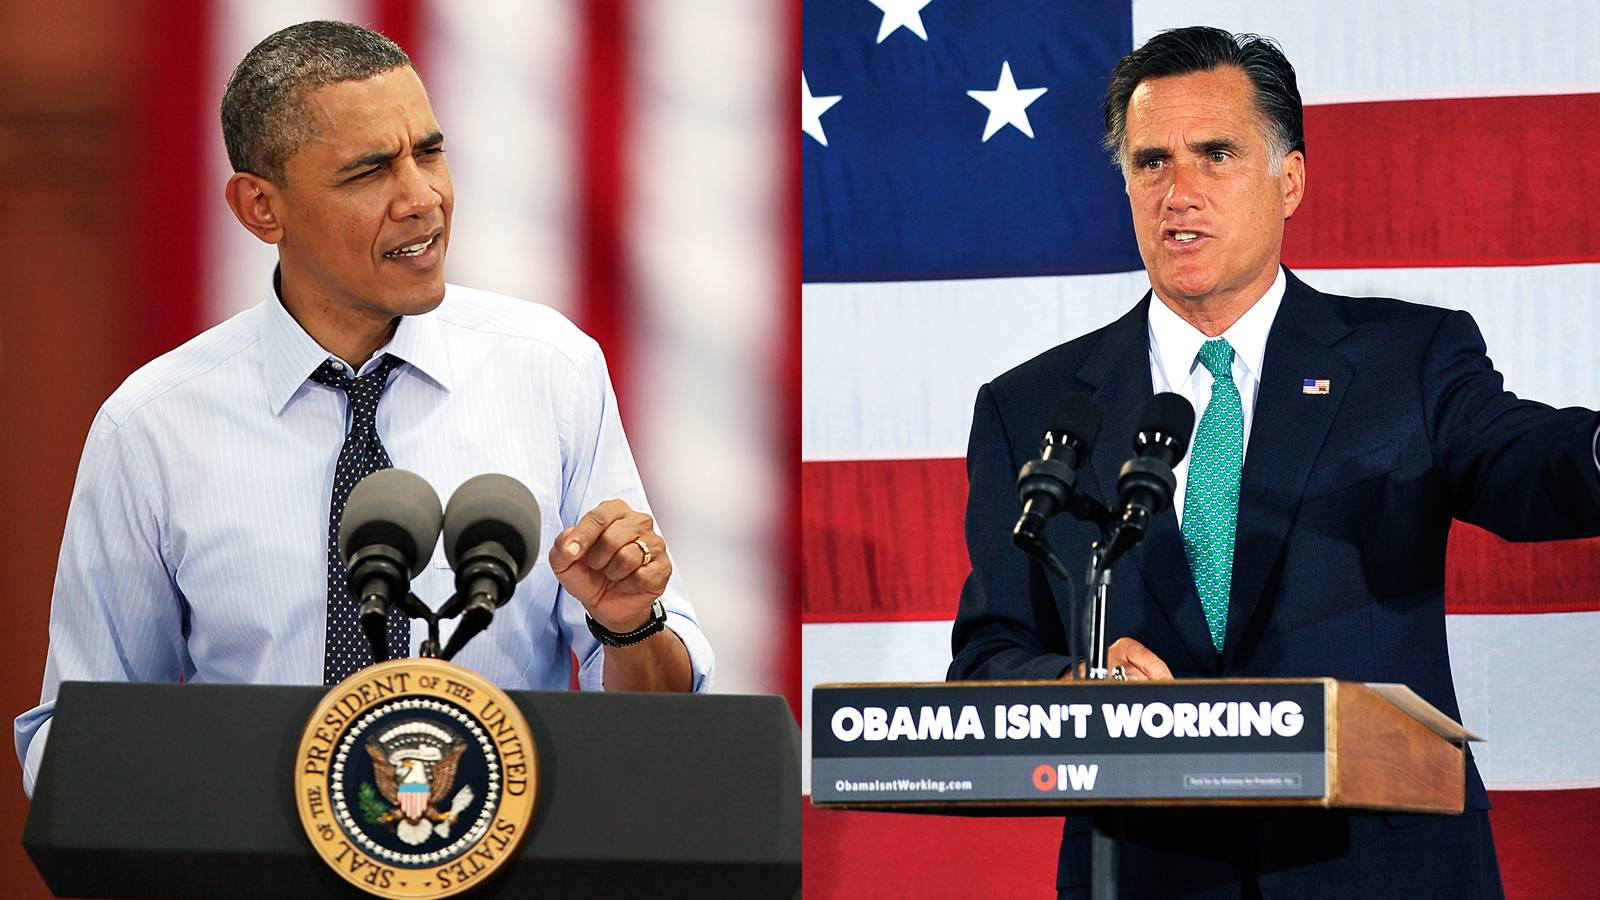 Obama vs. Romney - President Obama and GOP frontrunner Mitt Romney are trying out messages on the campaign trail. Obama is arguing that the change voters sought in 2008 has just begun. Romney says the president is a &quot;nice guy,&quot; but the country can't afford four more years with Obama. -Joyce Jones